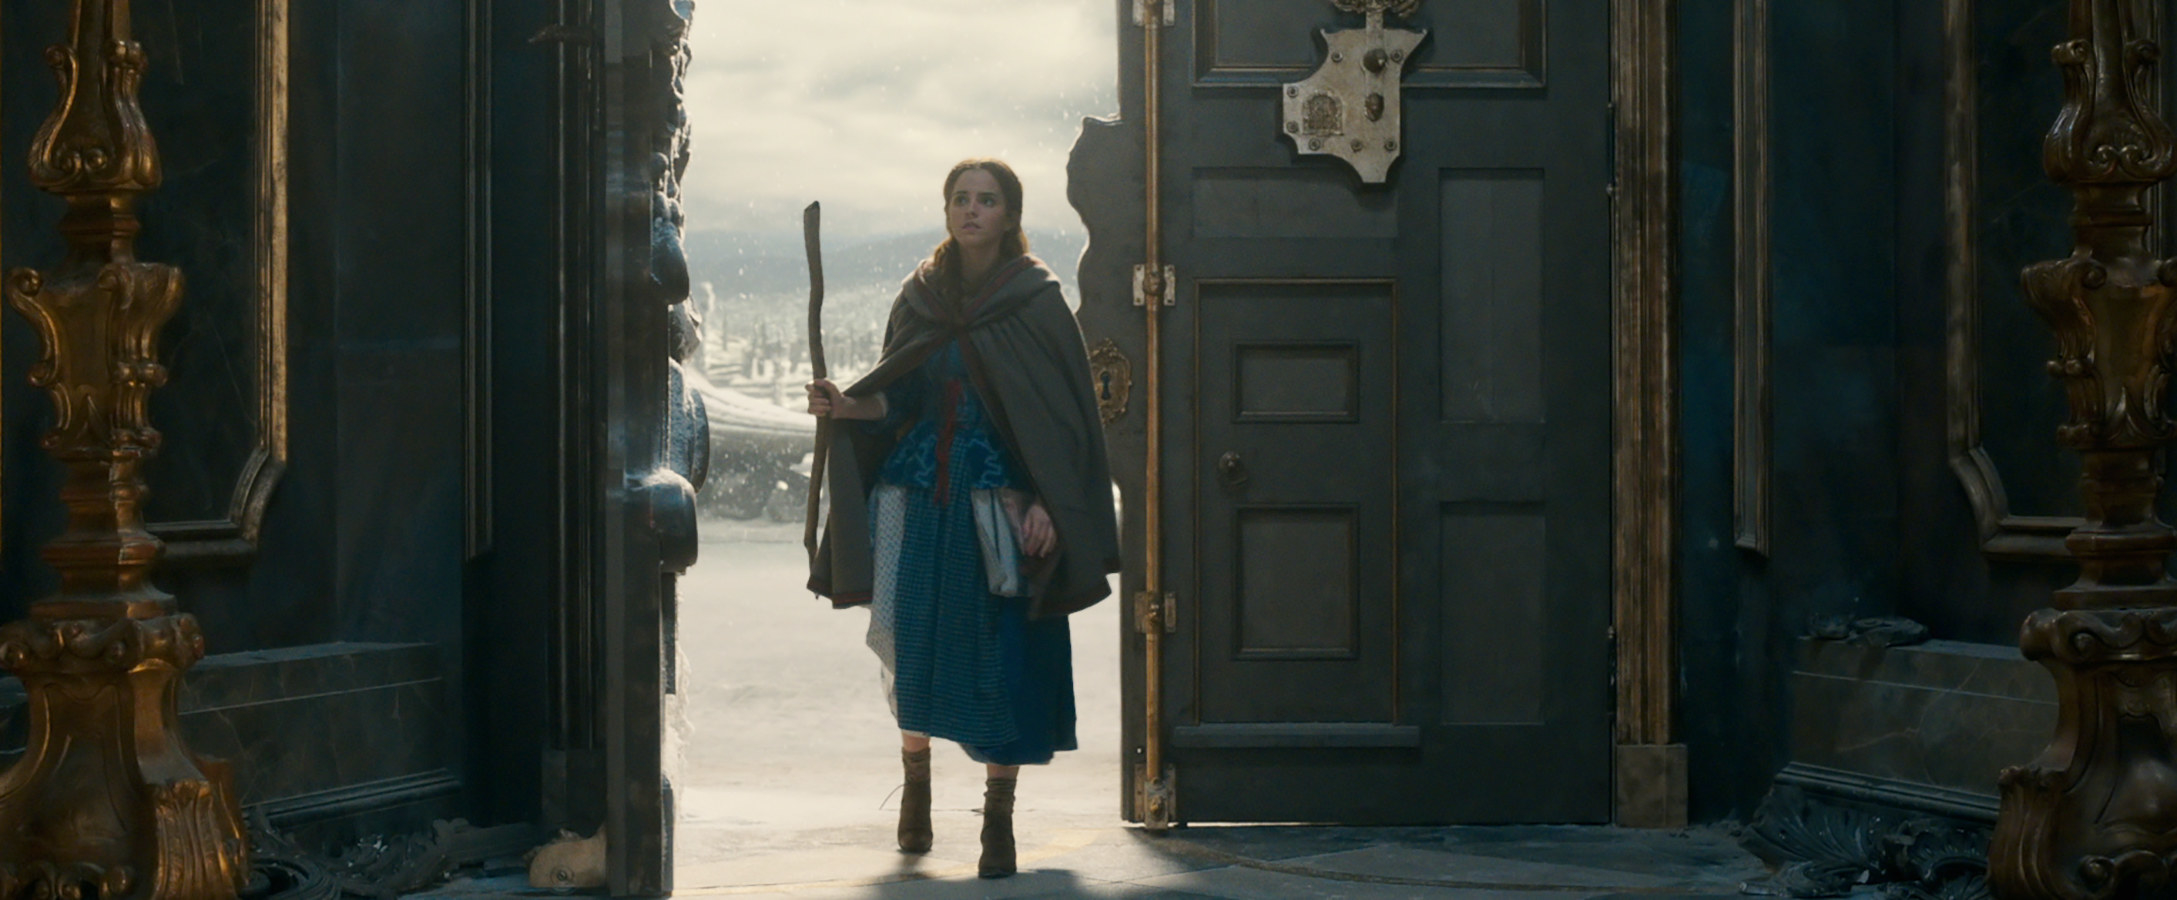 Belle wearing boots and a traveling cloak